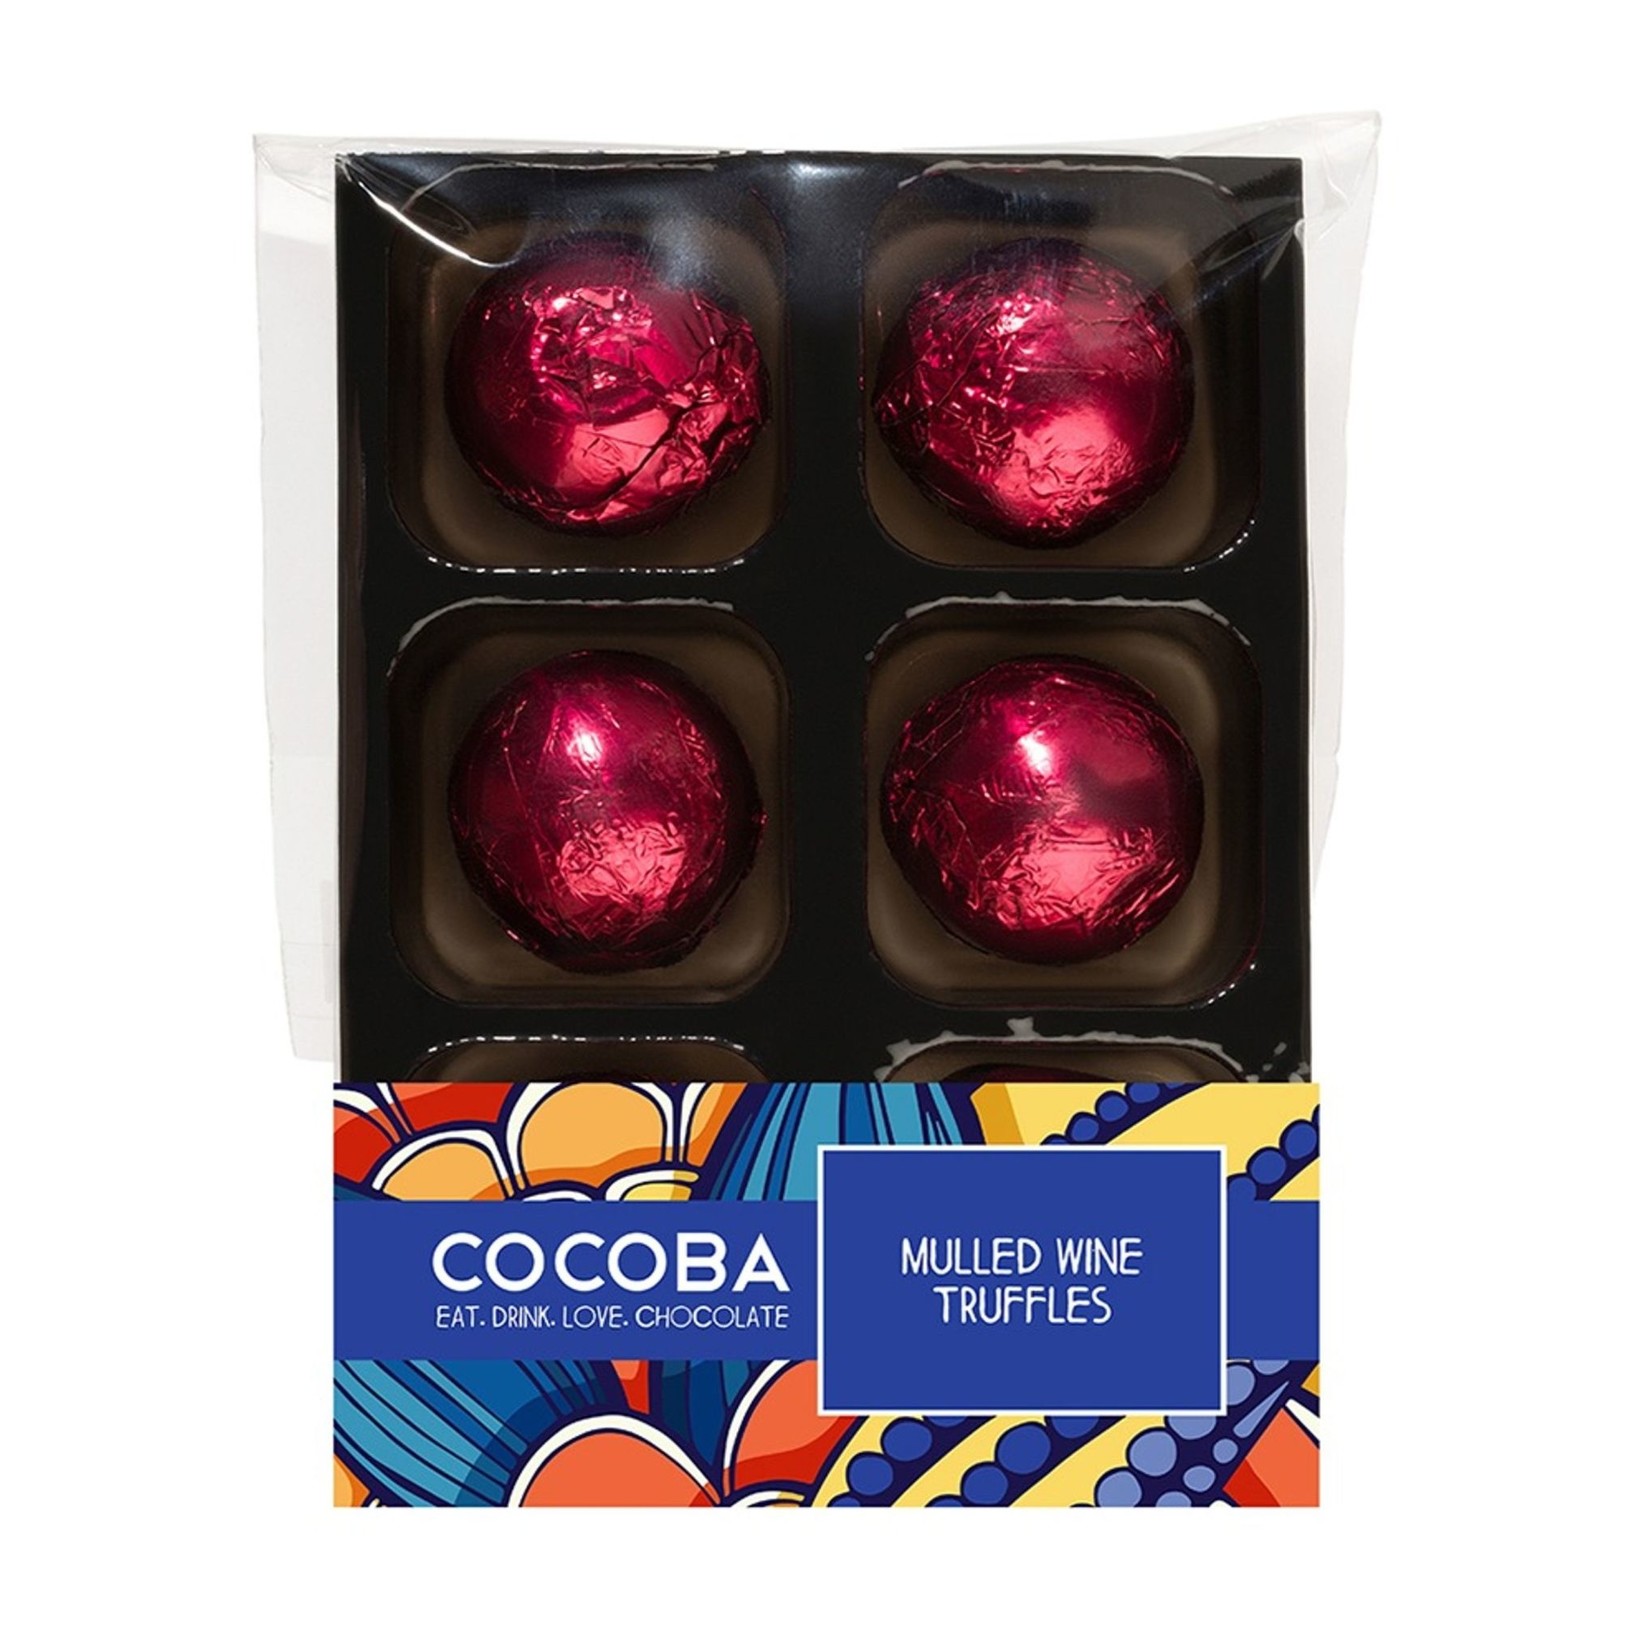 COCOBA COCOBA Mulled Wine Truffles